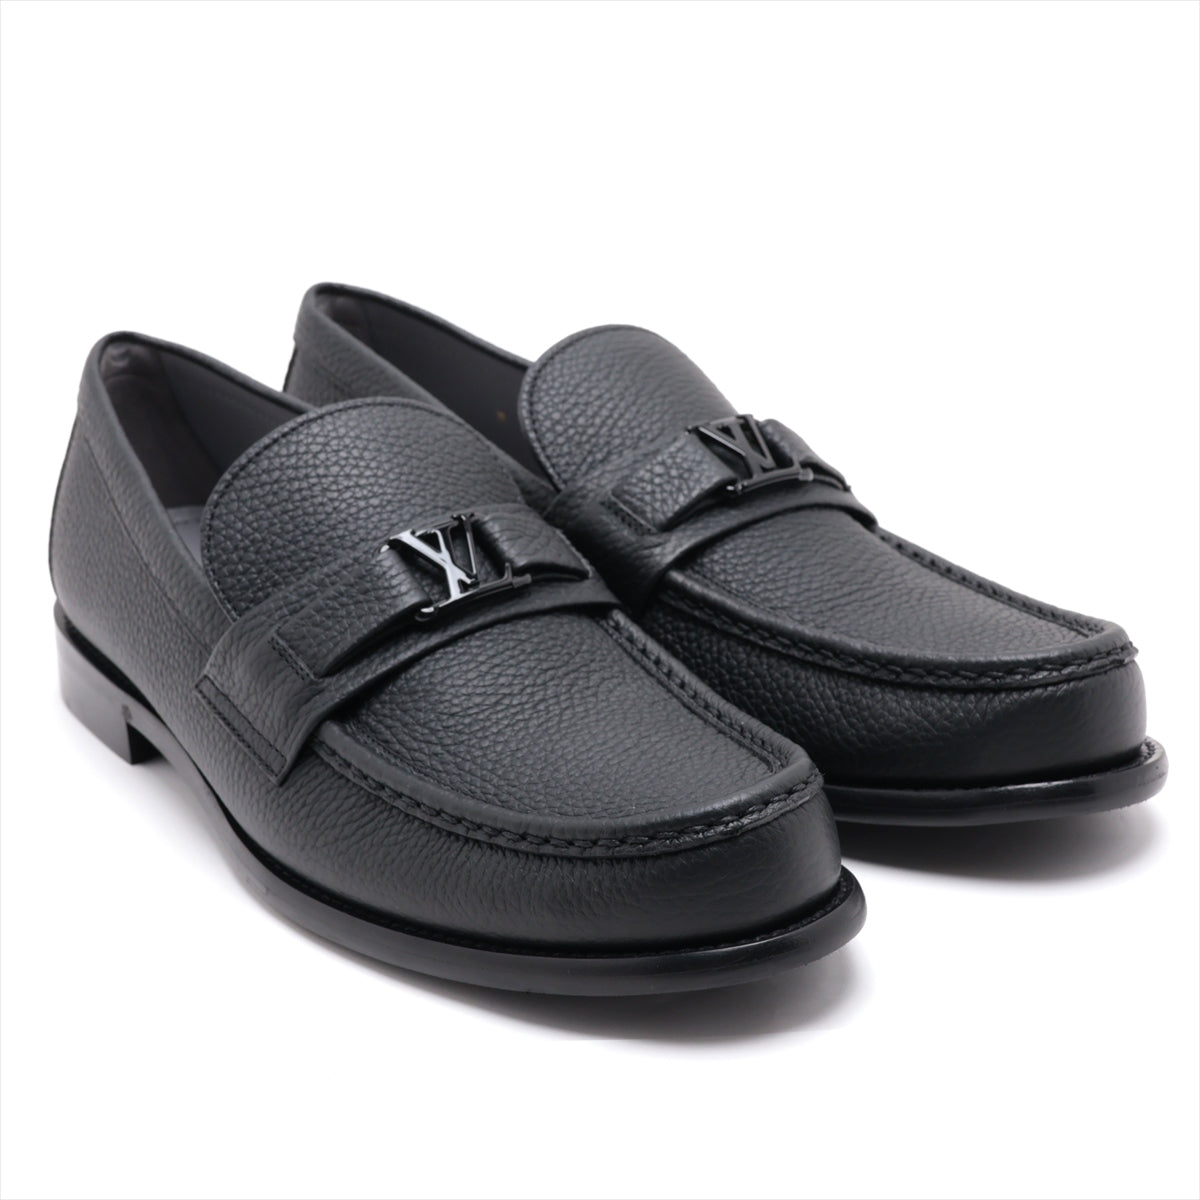 Louis Vuitton Major line 23 years Leather Loafer 8.5 Men's Black ND1213 LV Logo Box There is a storage bag